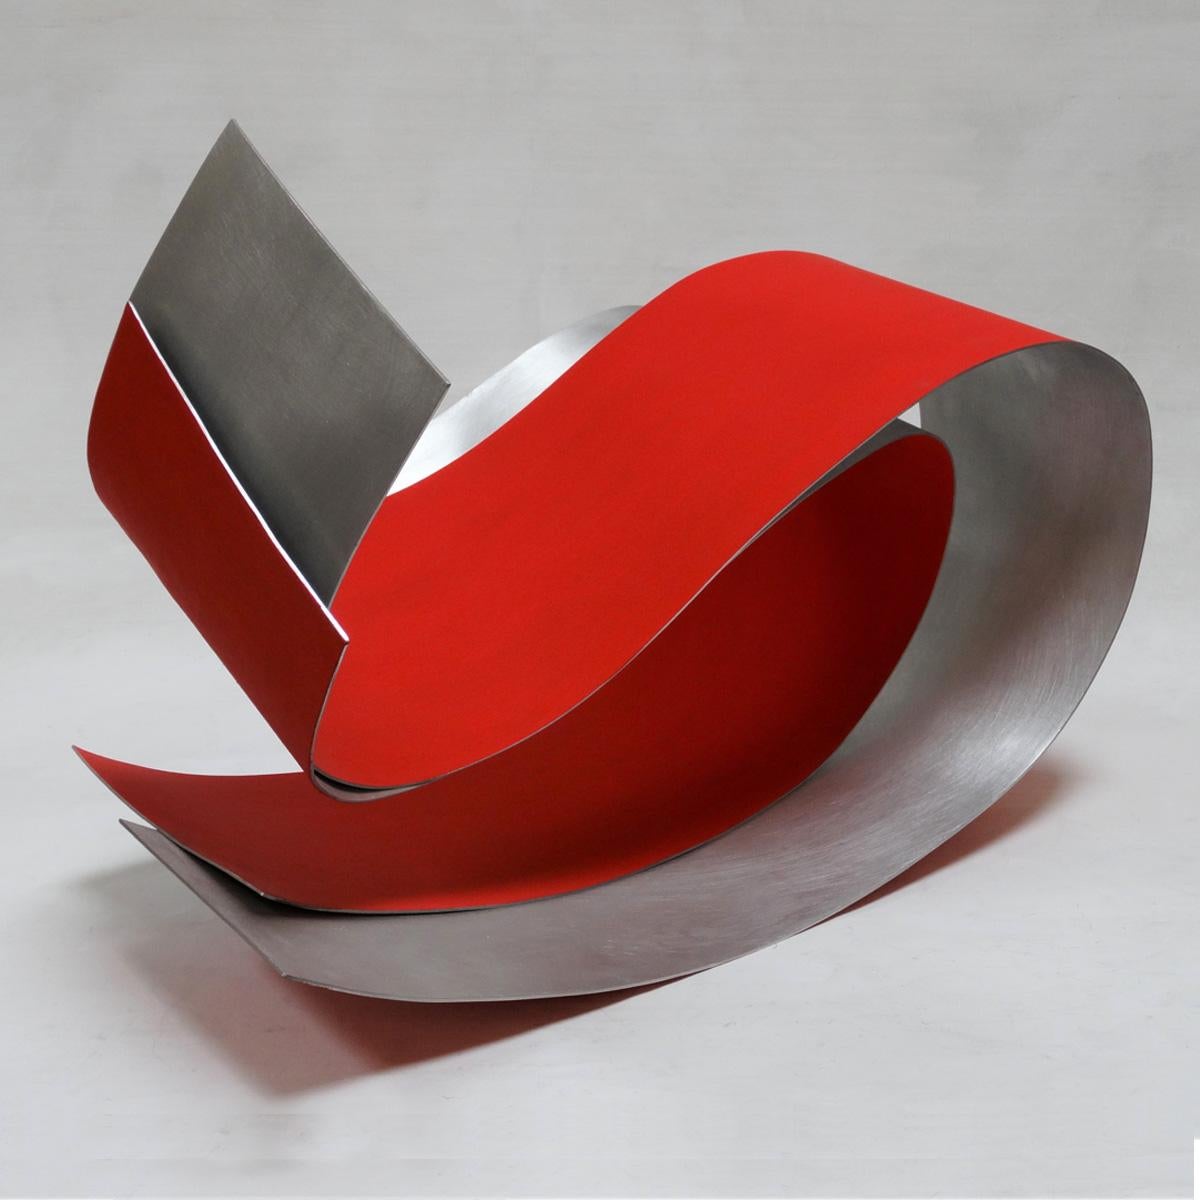 Acull 46 - Abstract, Outdoor Sculpture, Contemporary, Art, Red, Rafael Amorós For Sale 2